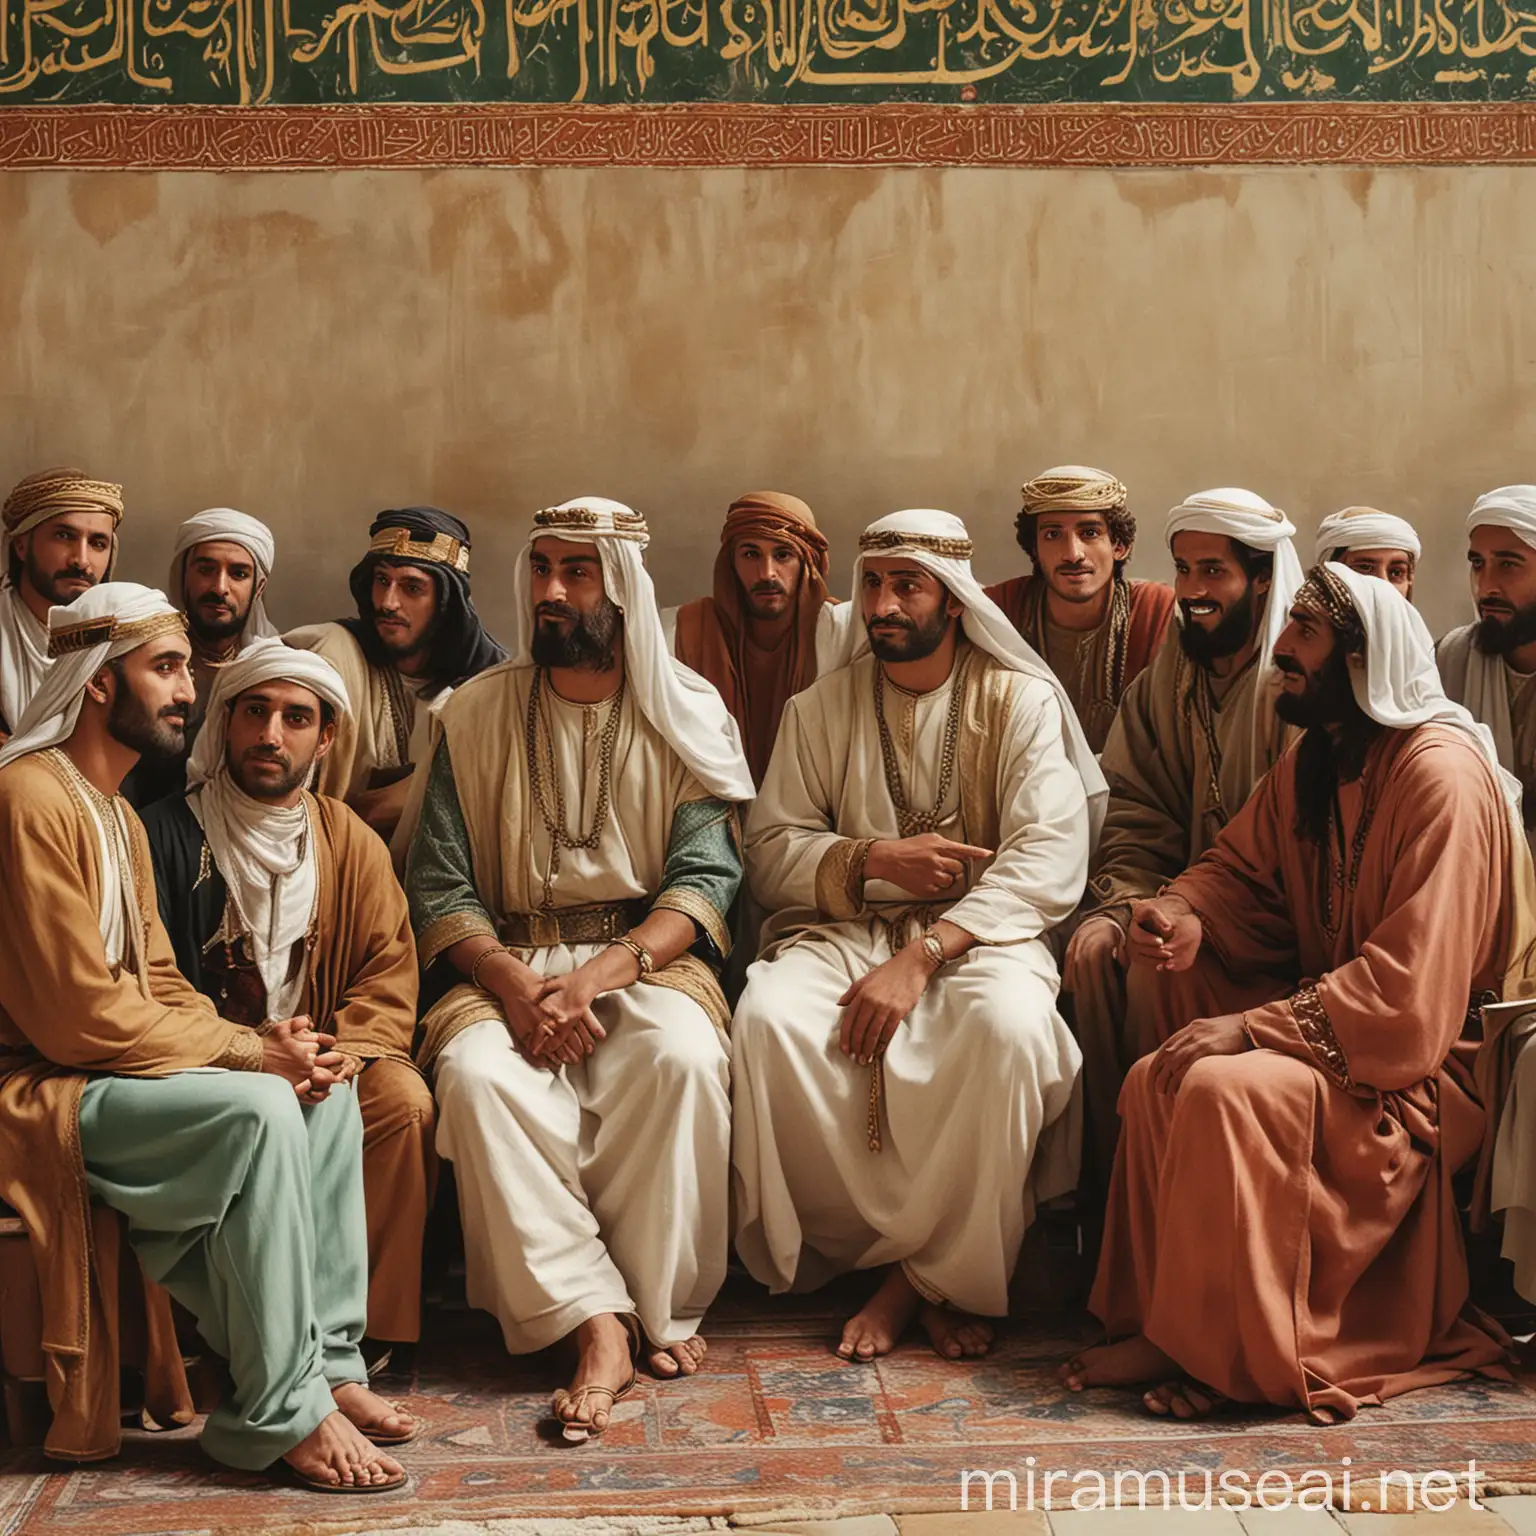 600ad arabian meeting in group close angle sitting on chair
